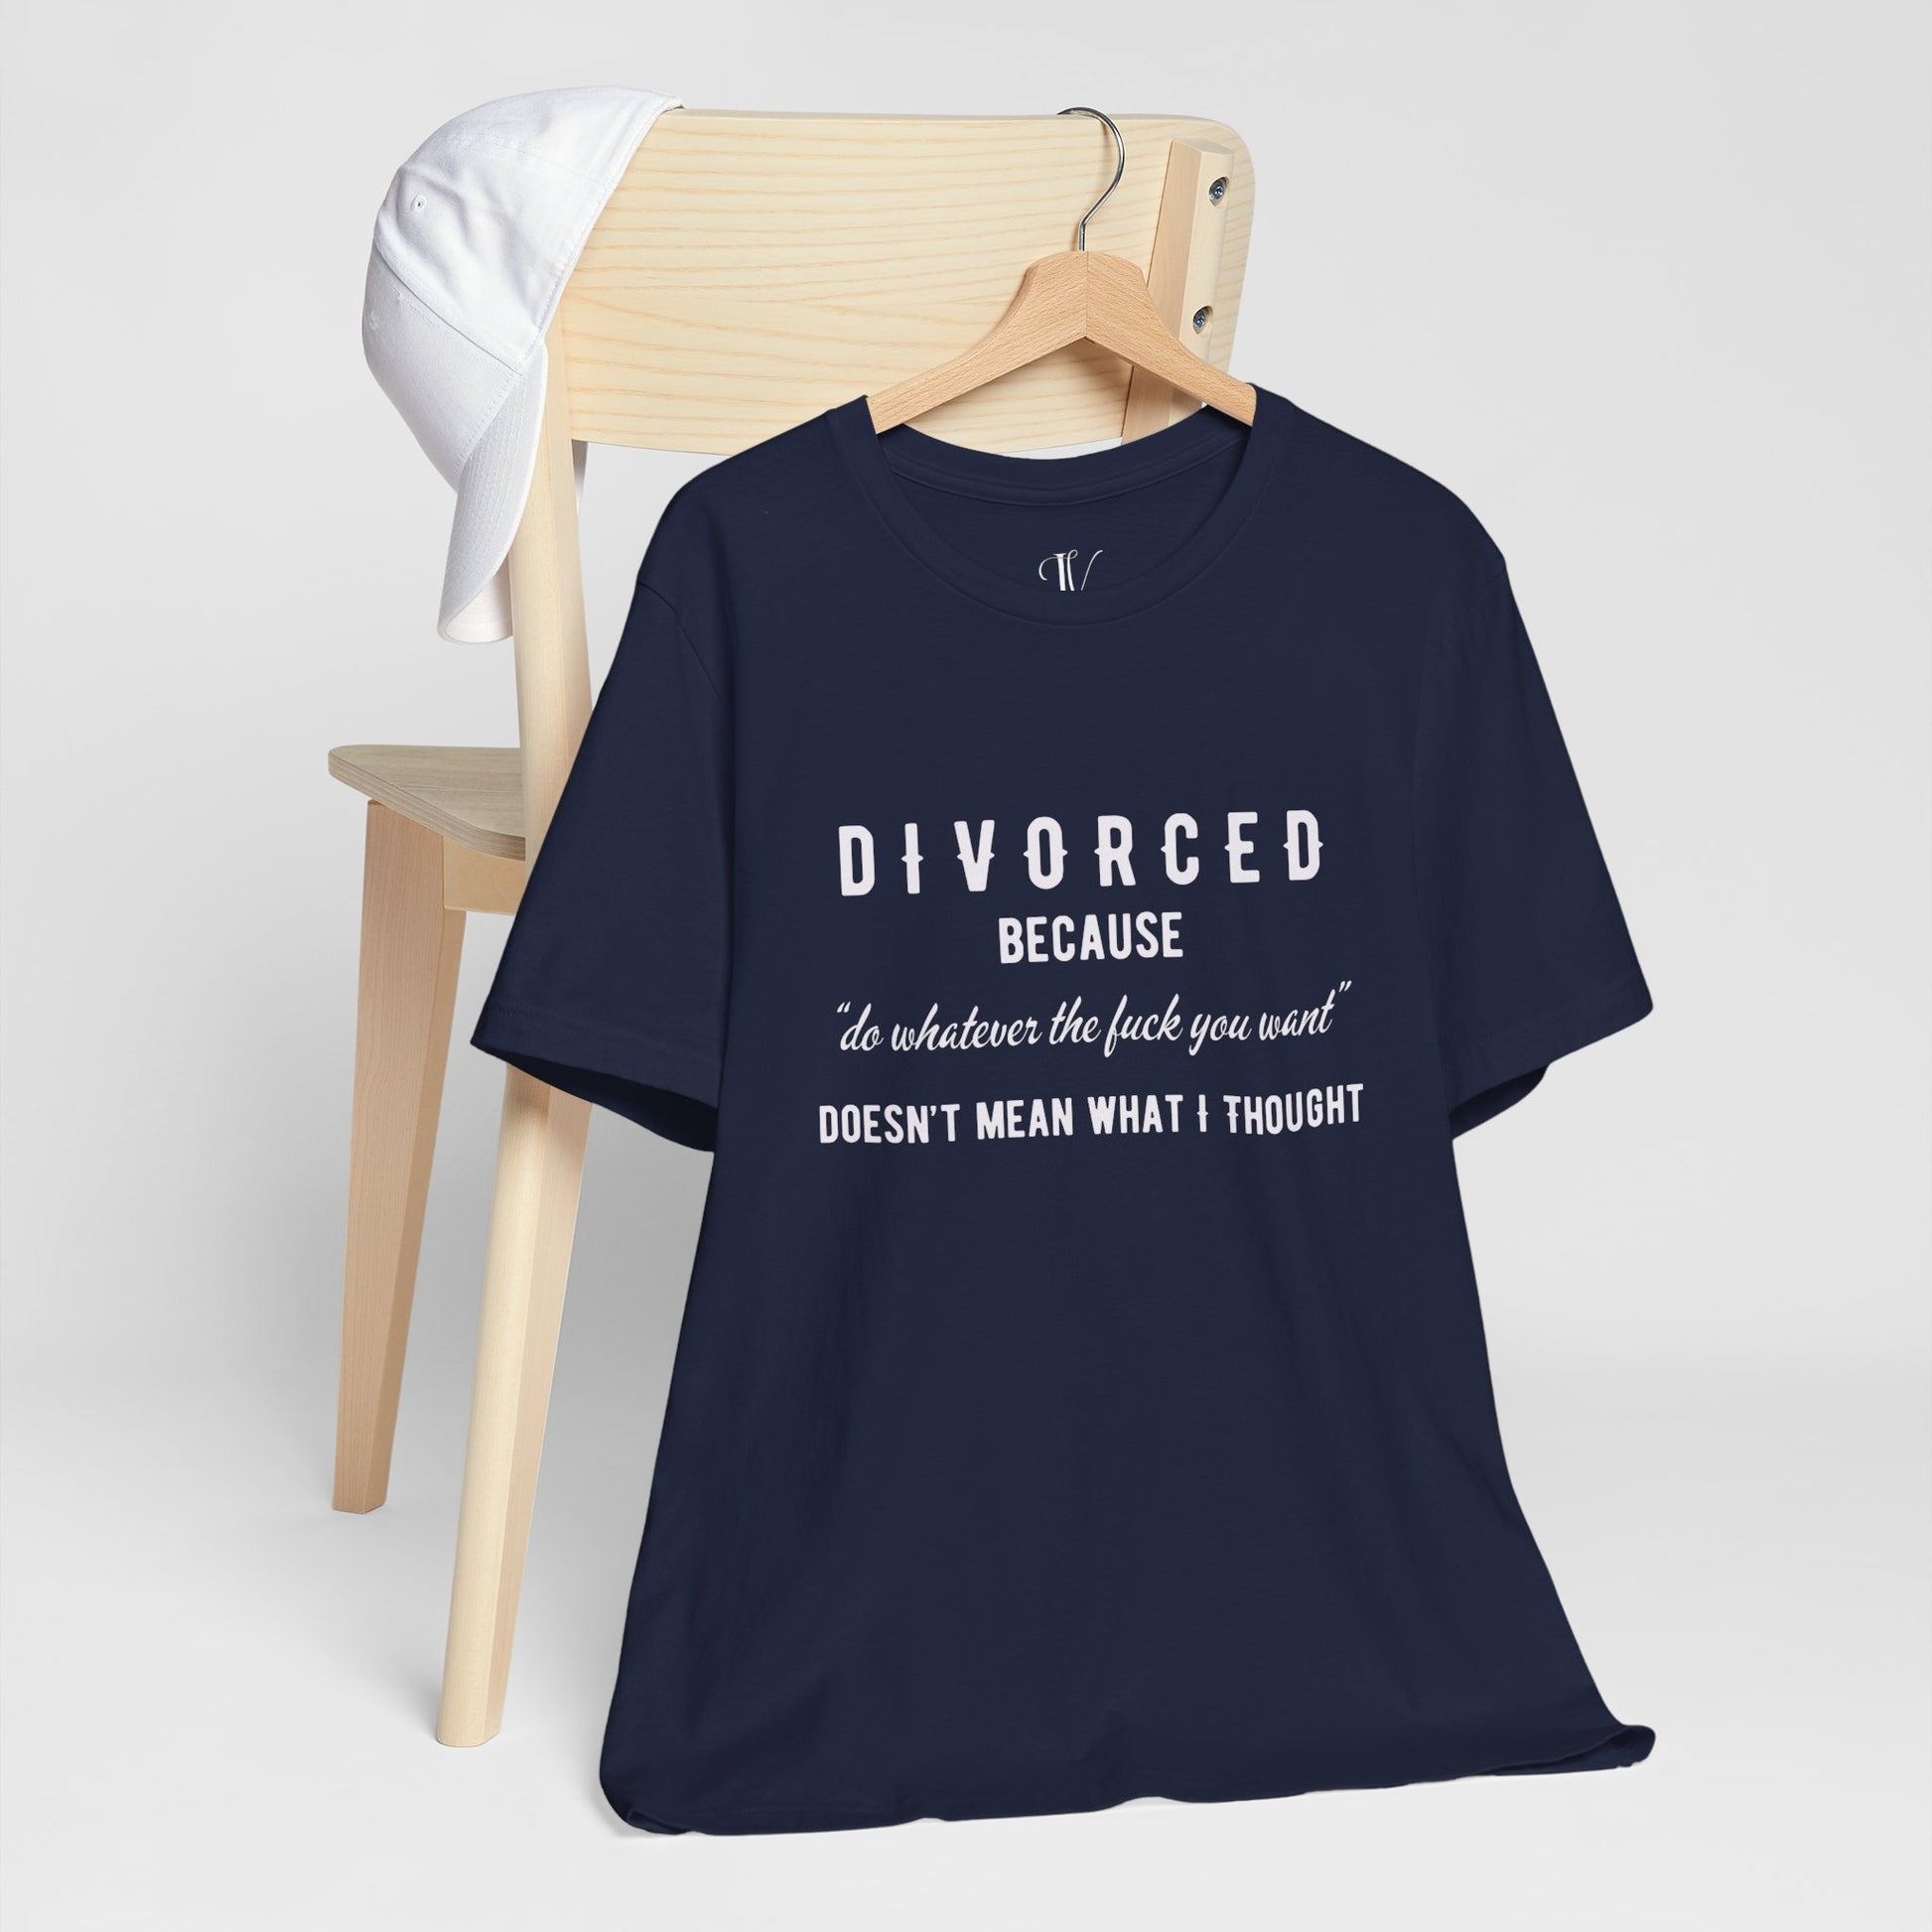 Divorced Shirt - Funny Divorce Party Gift for Ex-Husband or Ex-Wife T-Shirt Navy XS 